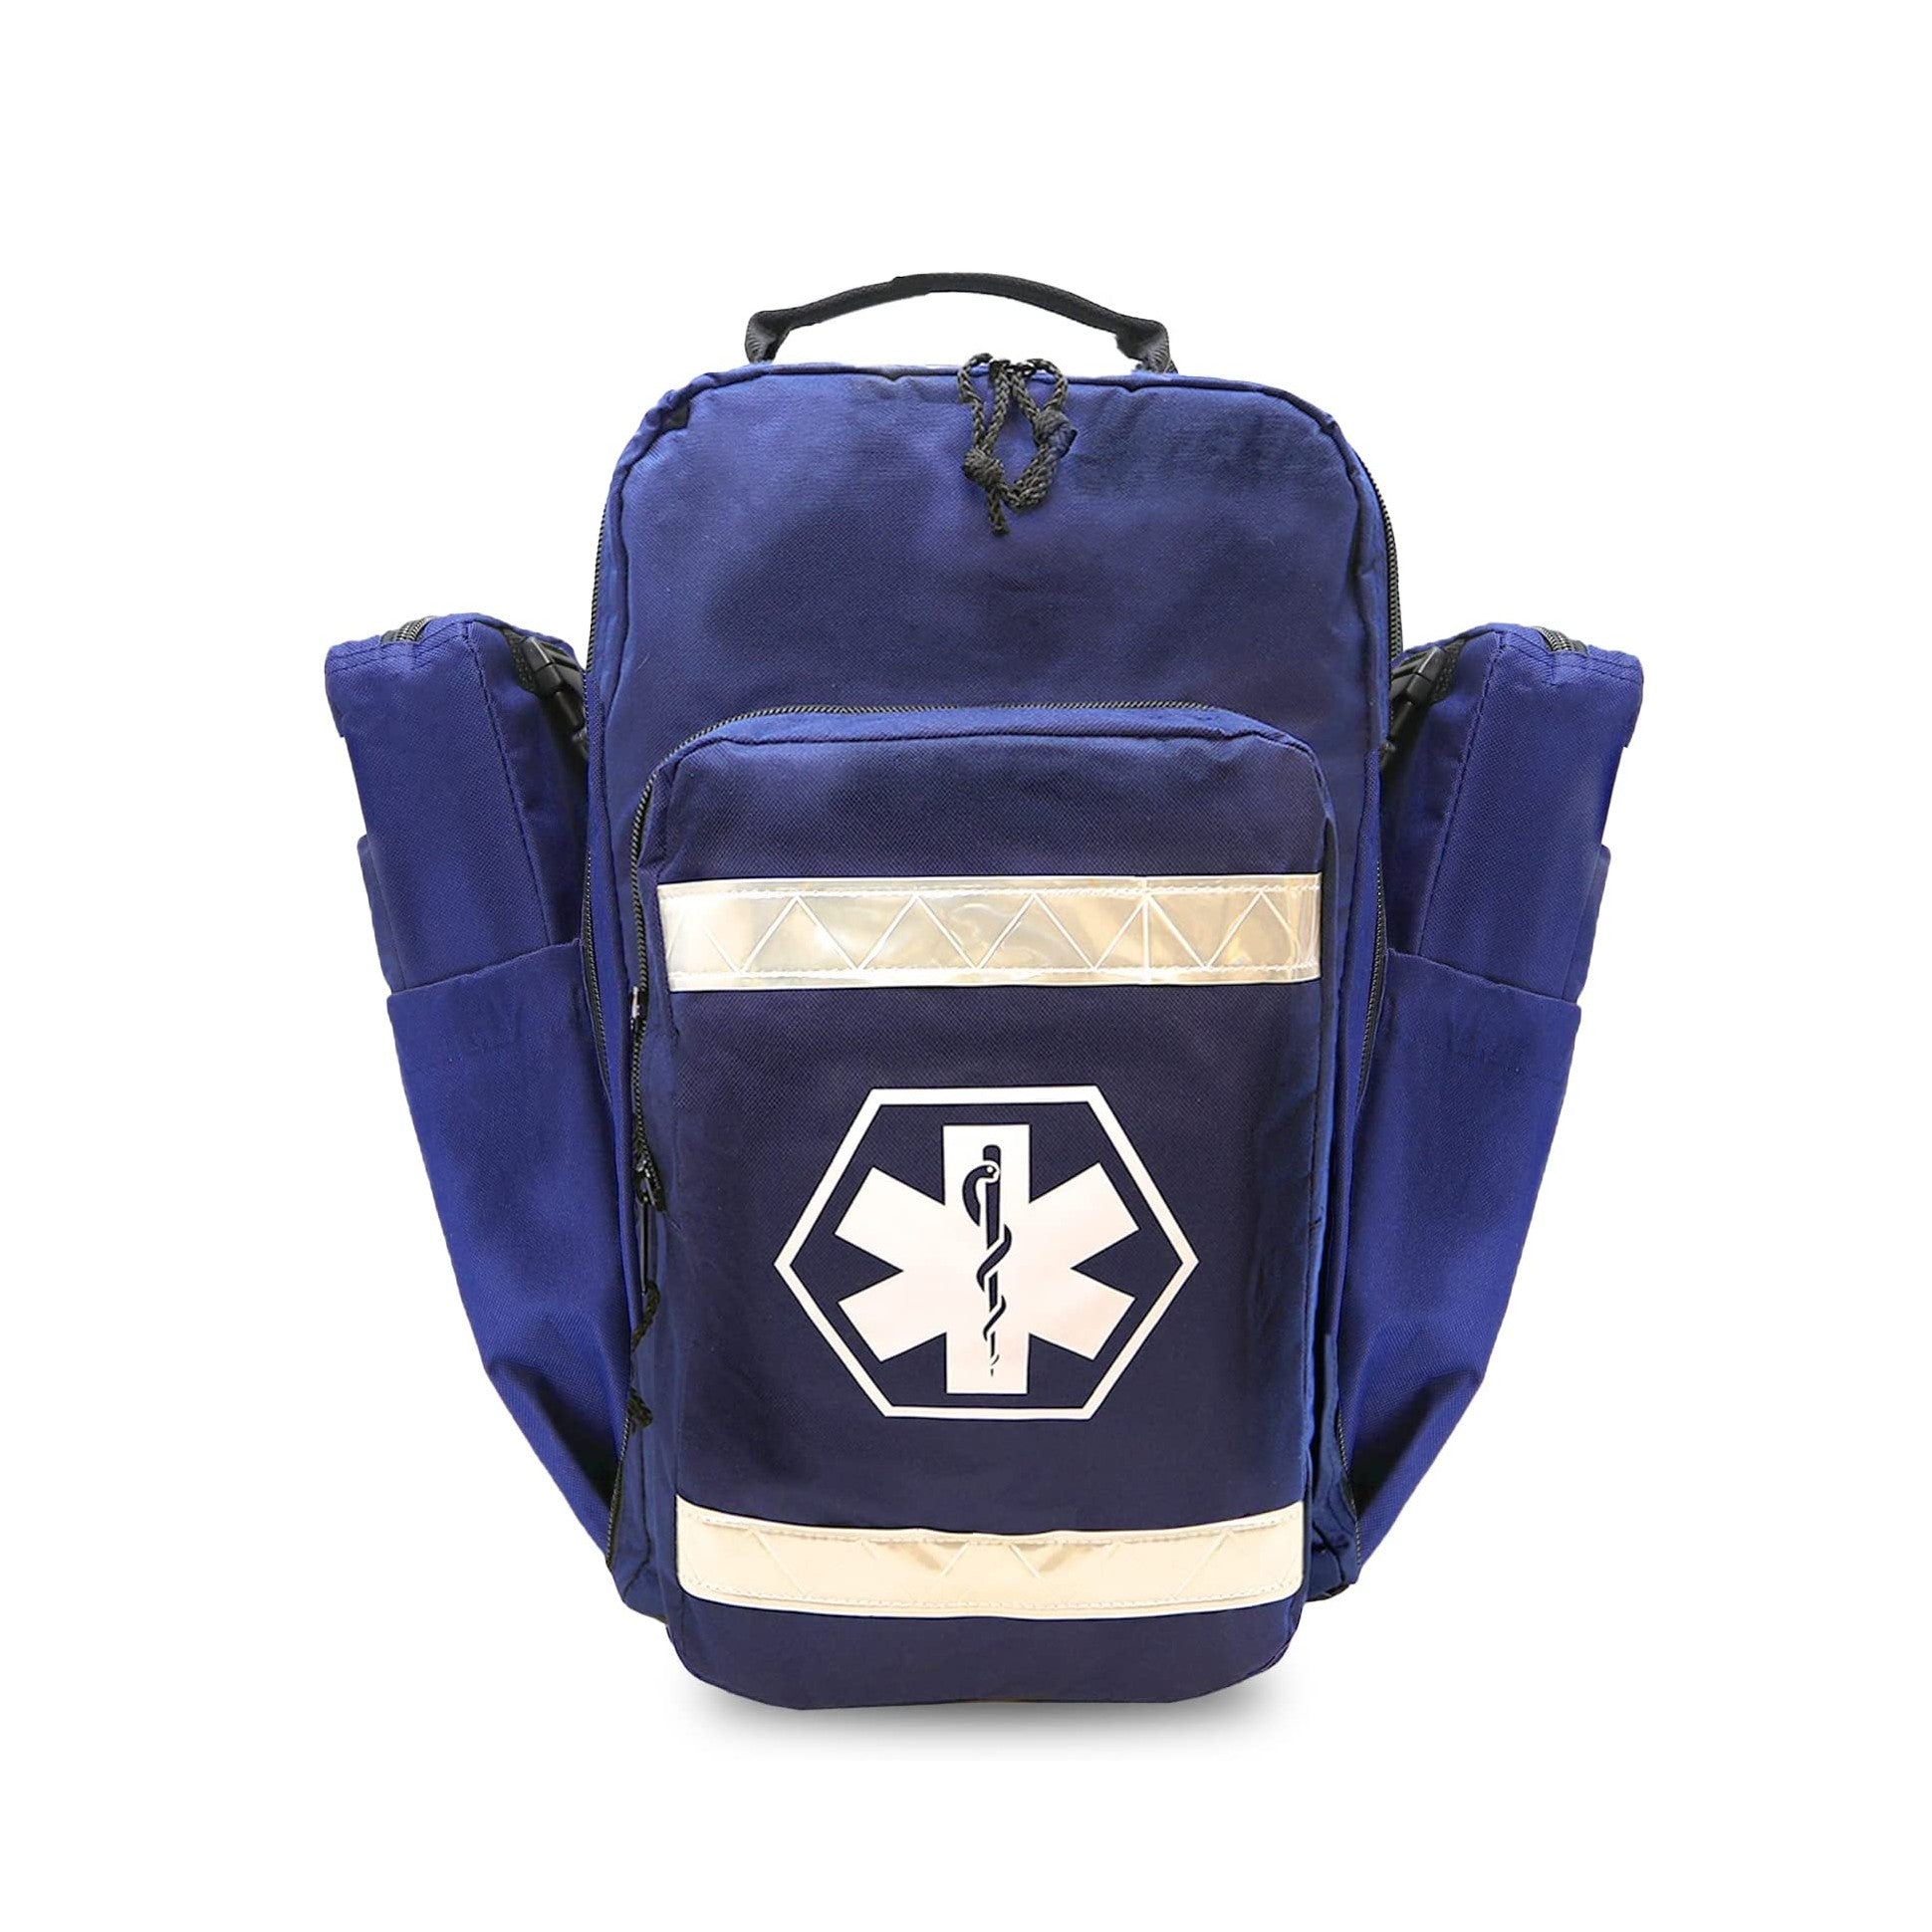 Dixie EMS Ultimate O2 Oxygen Backpack Jump Bag with Color Coded Detachable Pockets, O2 Cylinder Carrier, Navy Blue